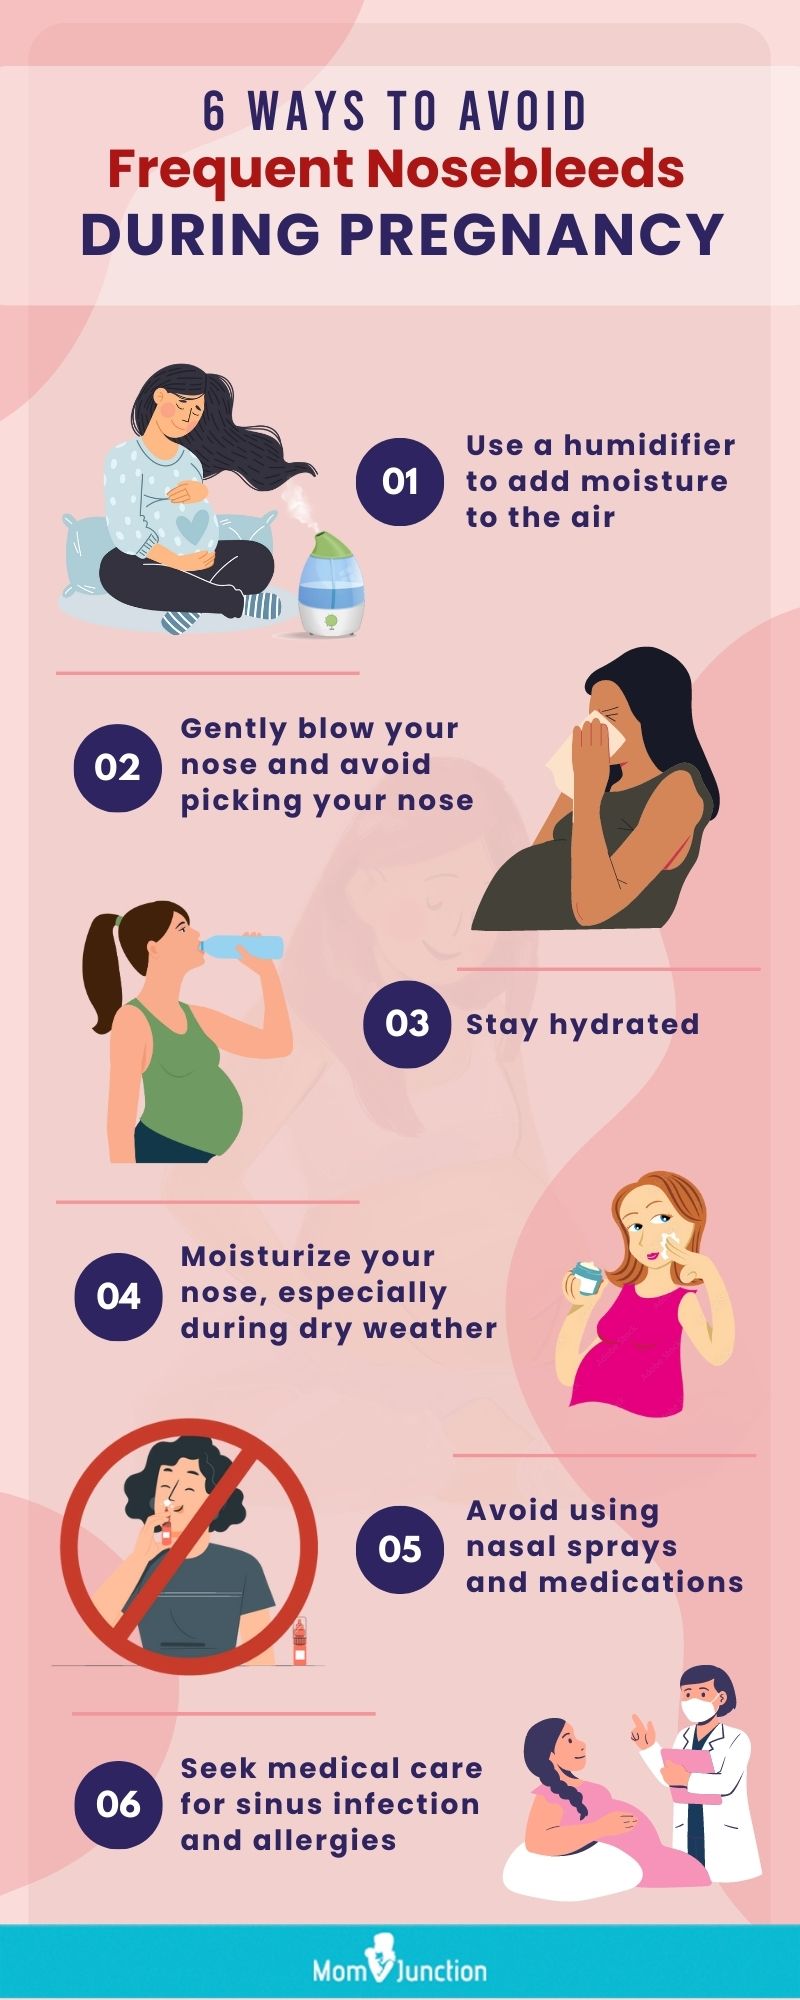 ways to avoid frequent nosebleeds during pregnancy (infographic)